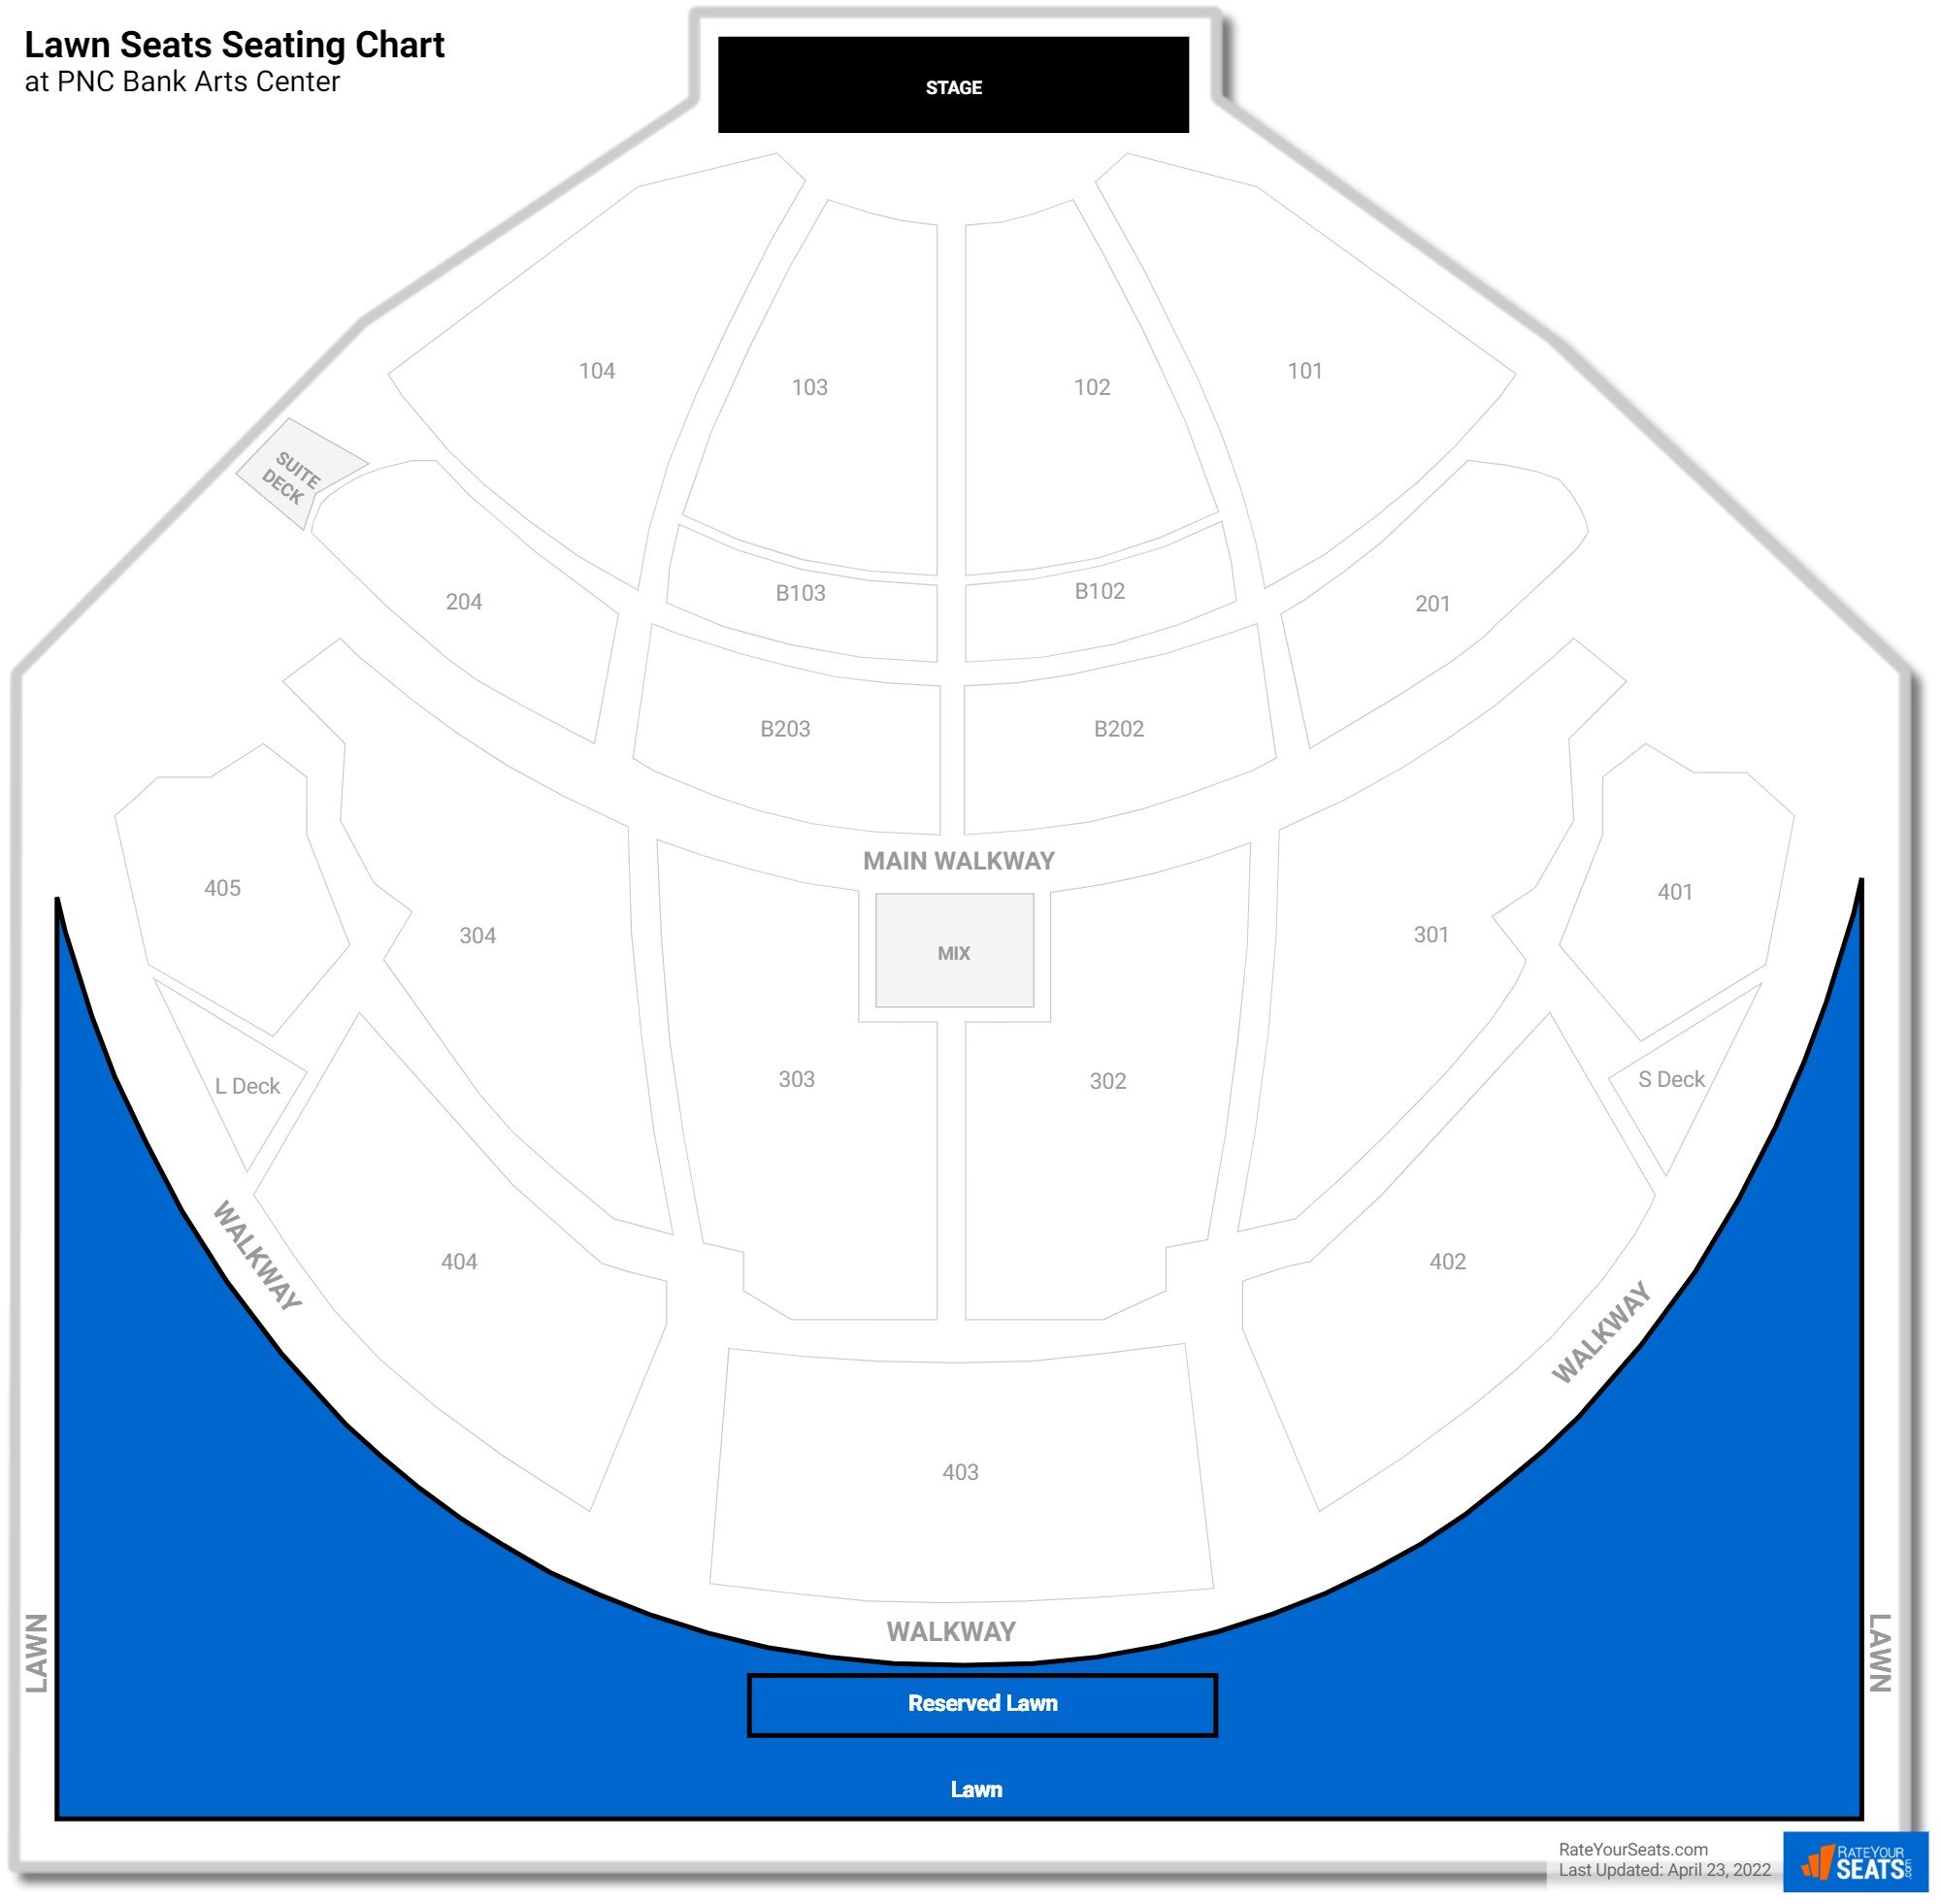 Concert Lawn Seats Seating Chart at PNC Bank Arts Center. click to enlarge....